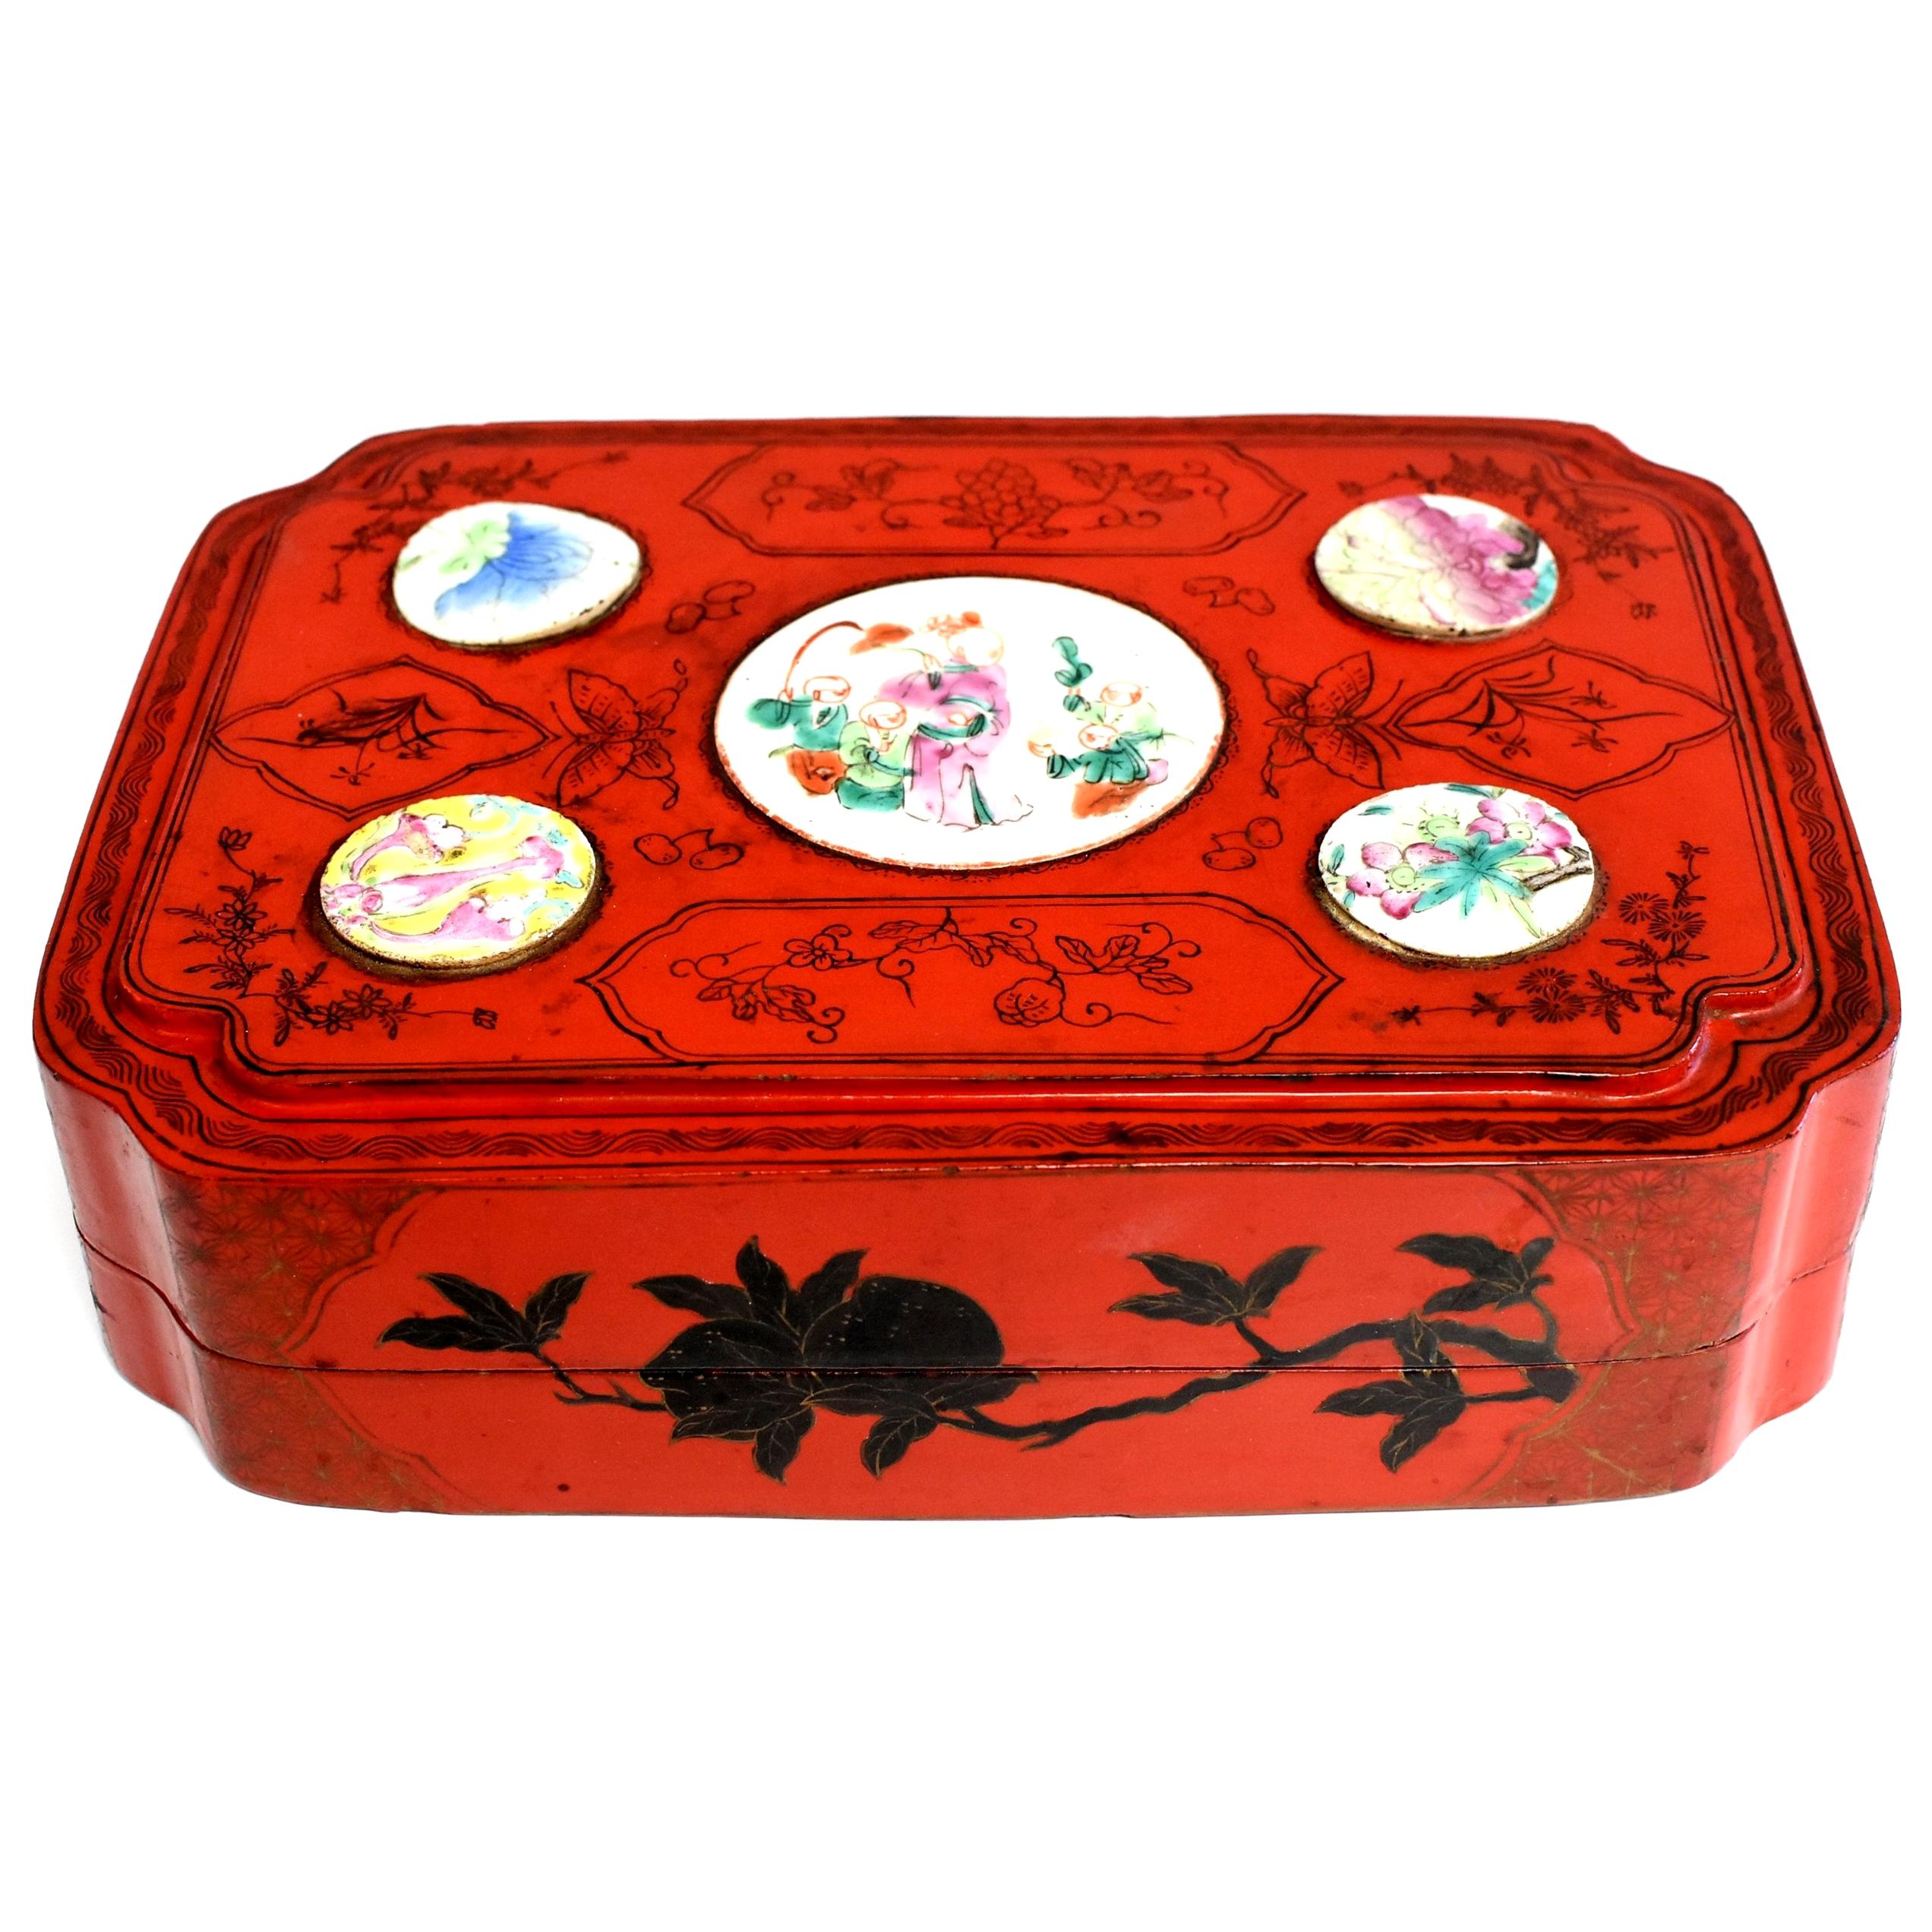 Vintage Red Lacquered Chinese Box with Antique Porcelains